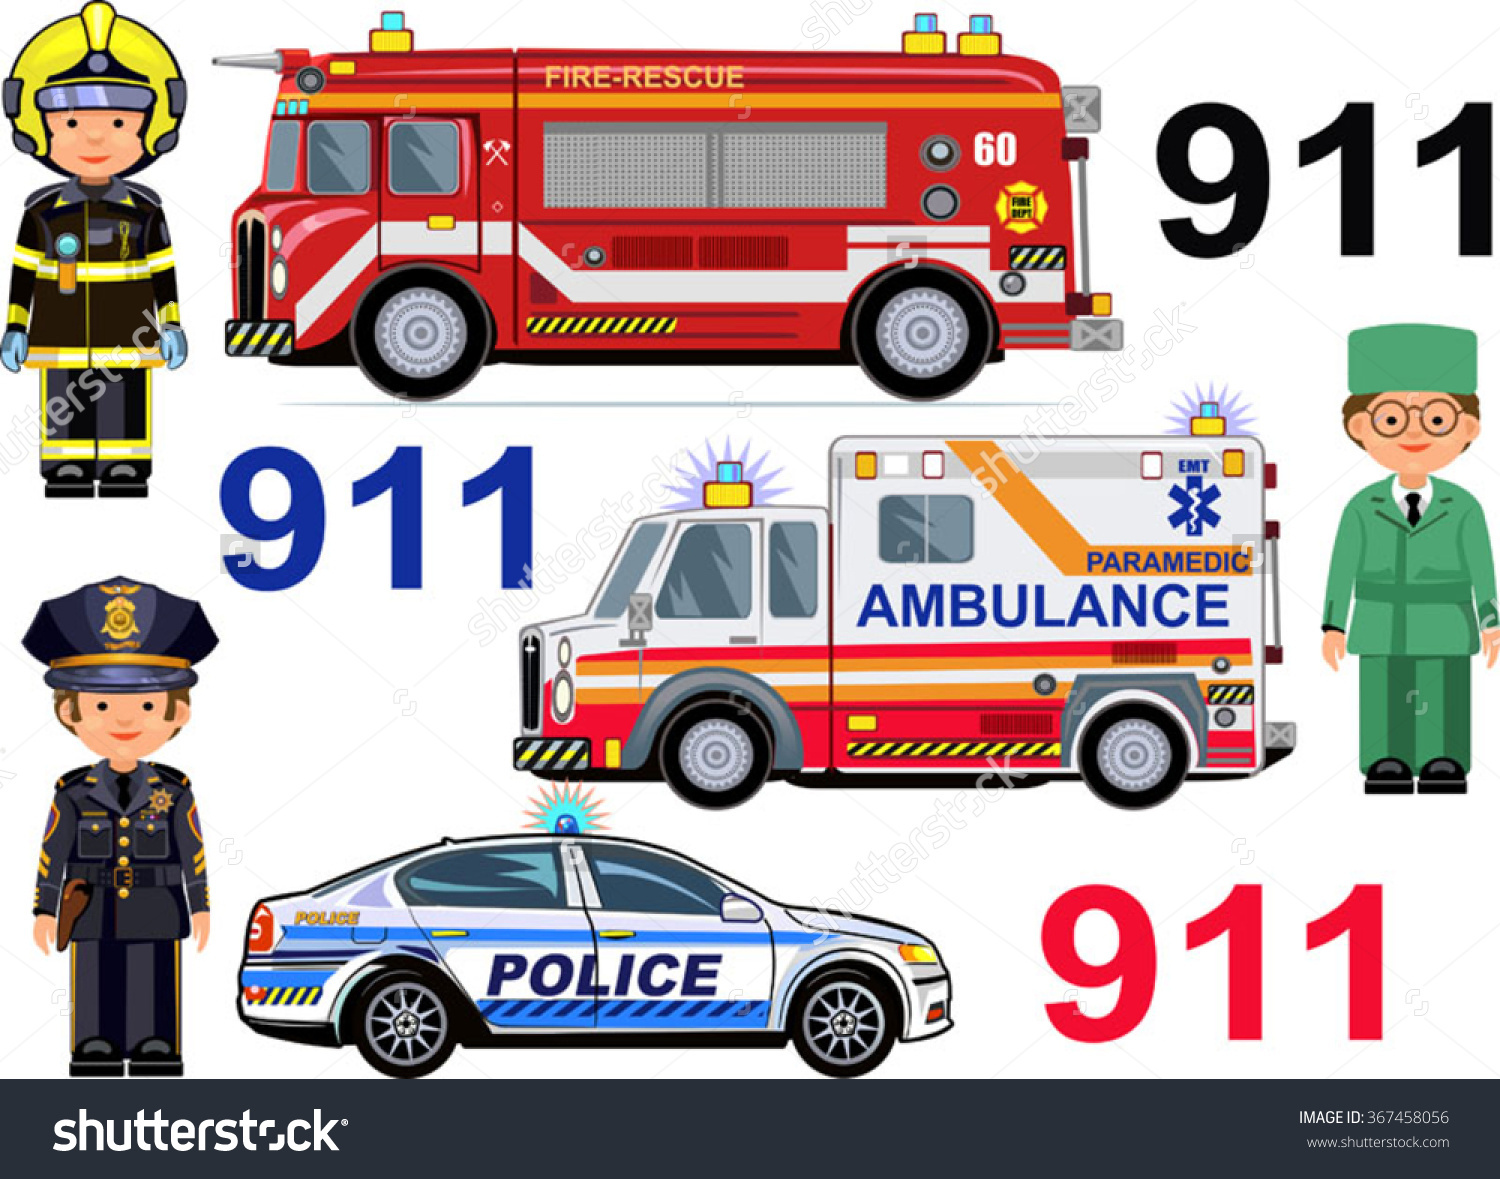 Fire truck and police car clipart.